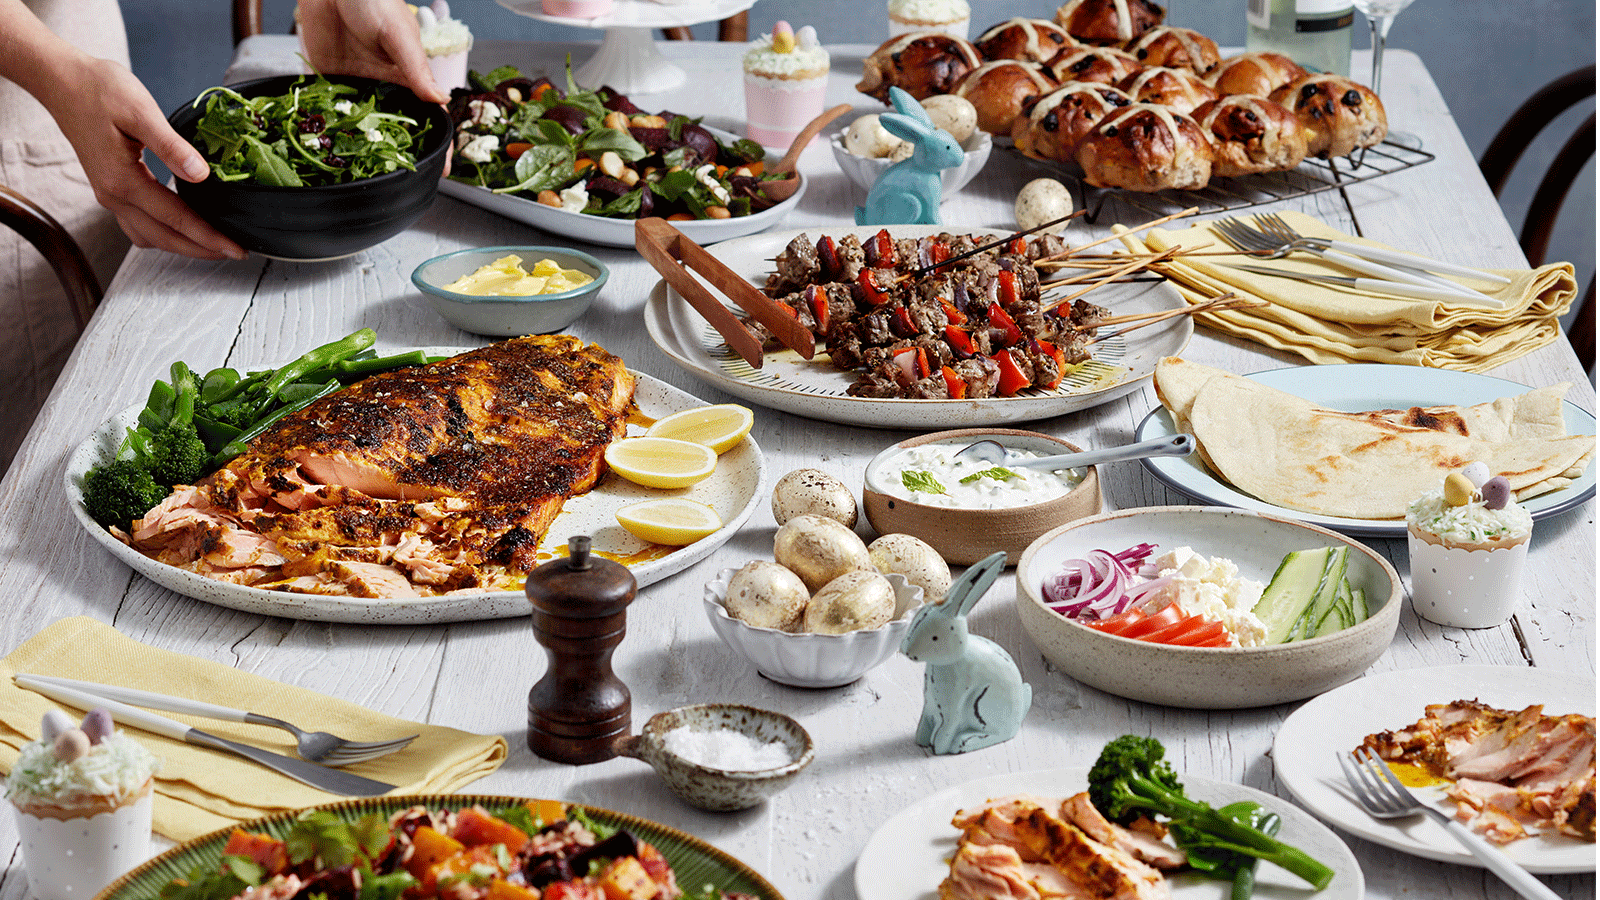 Not sure what to serve for Easter lunch? We've got it covered